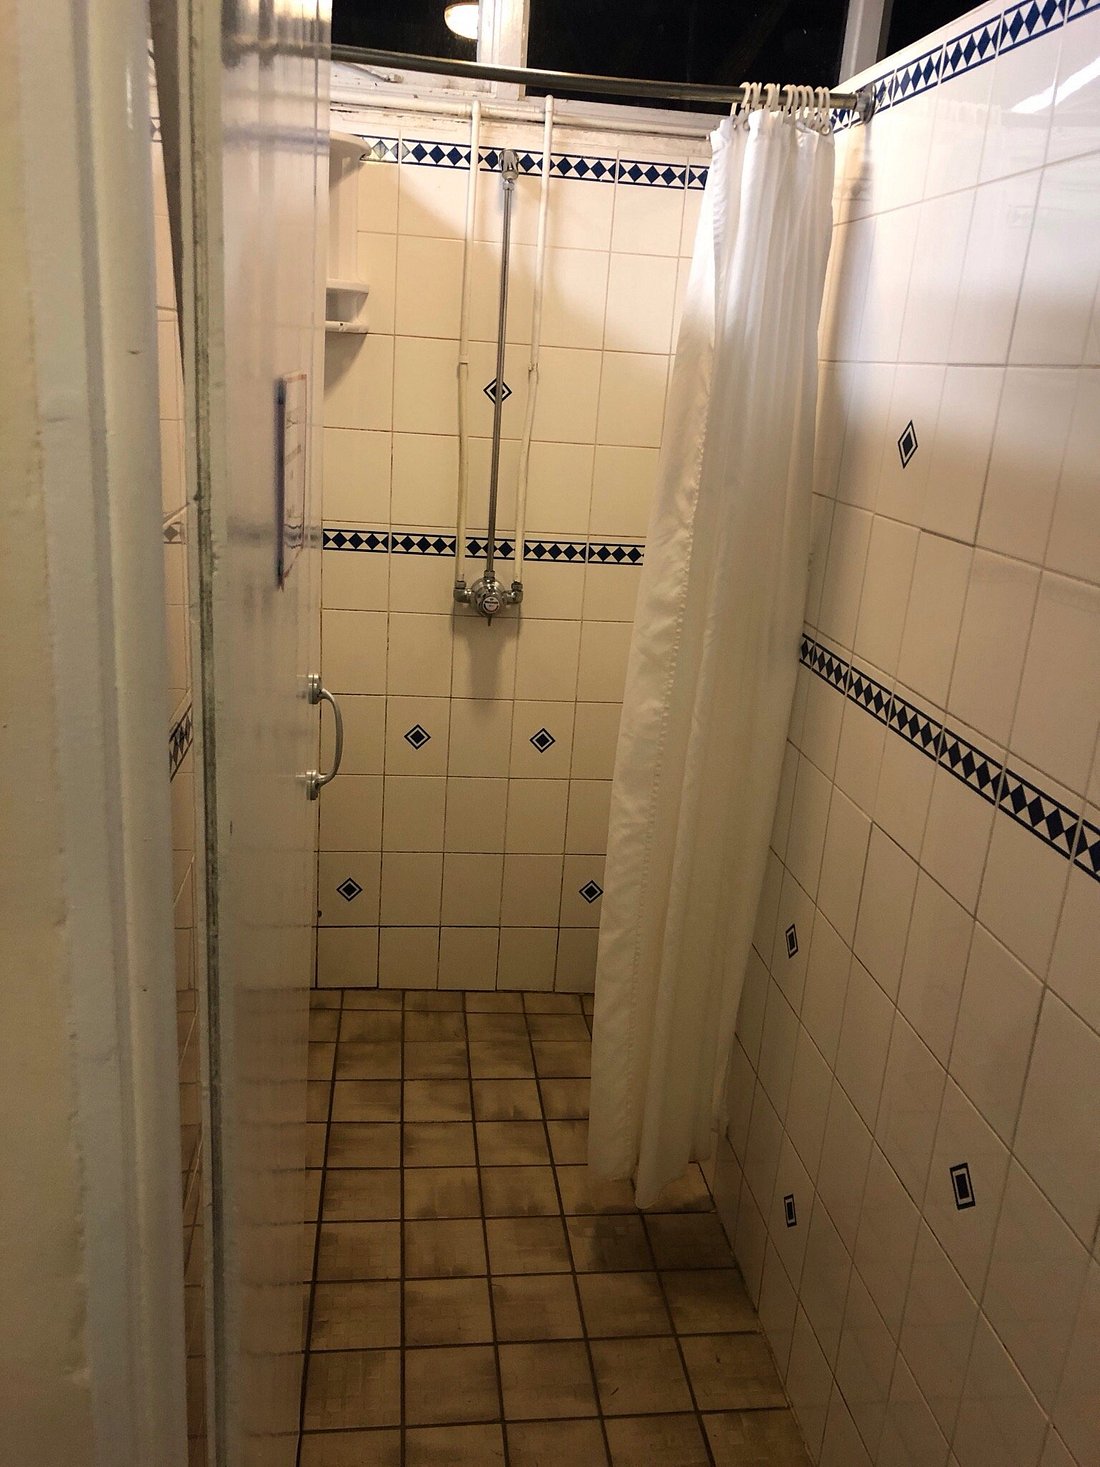 A full shower example